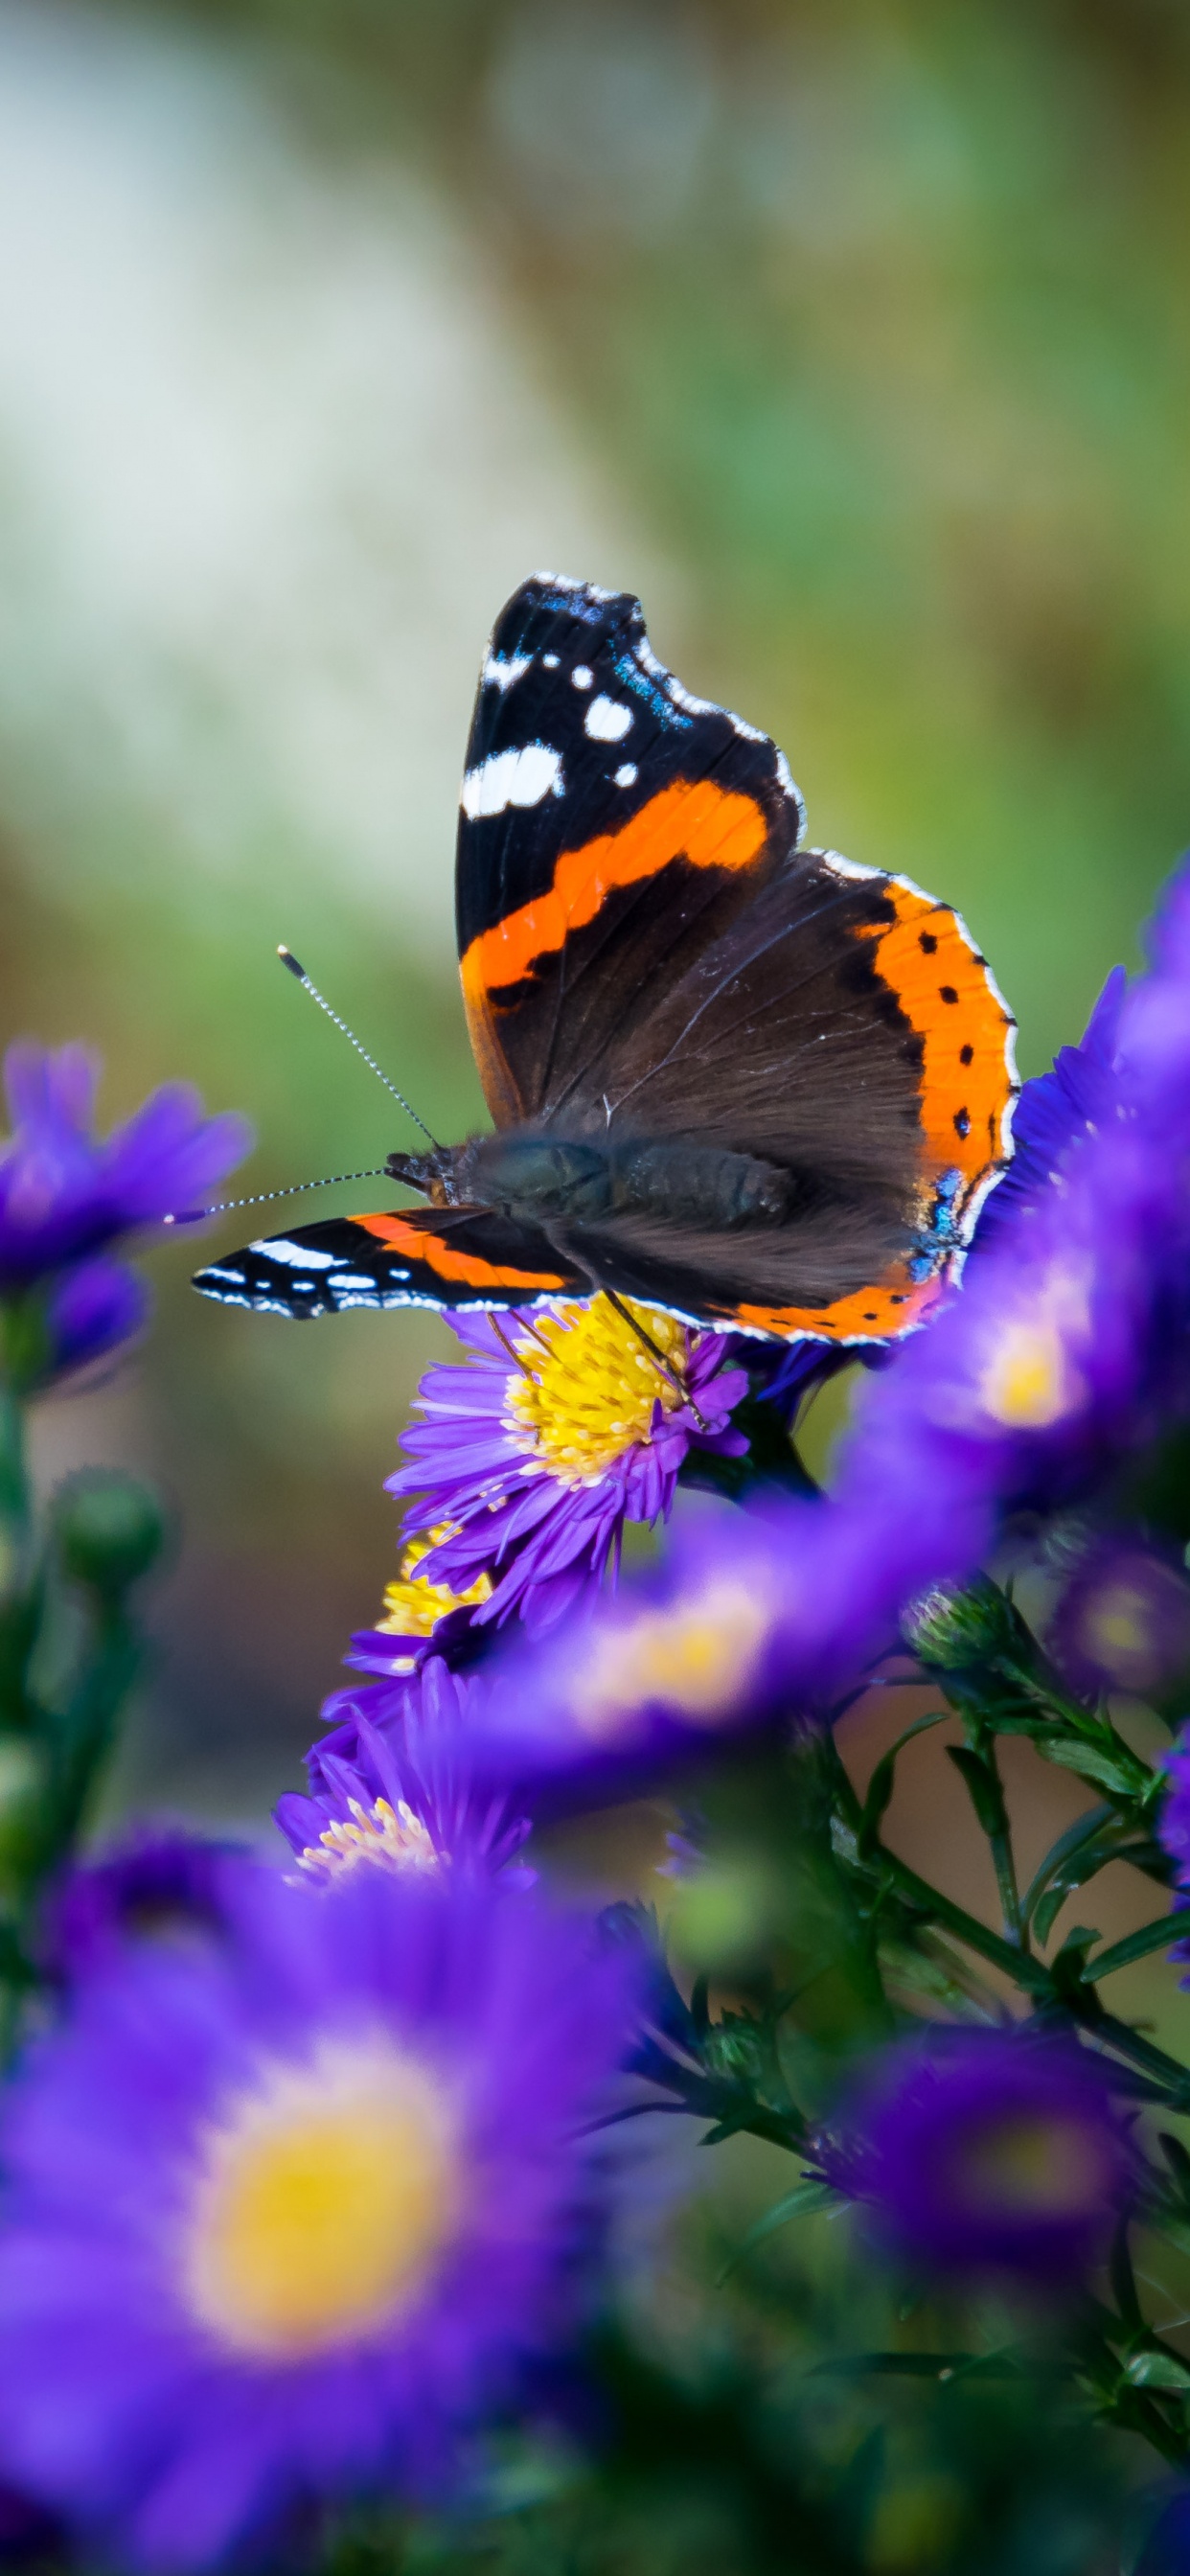 Insect, Flower, Butterfly, Cynthia Subgenus, Moths and Butterflies. Wallpaper in 1242x2688 Resolution